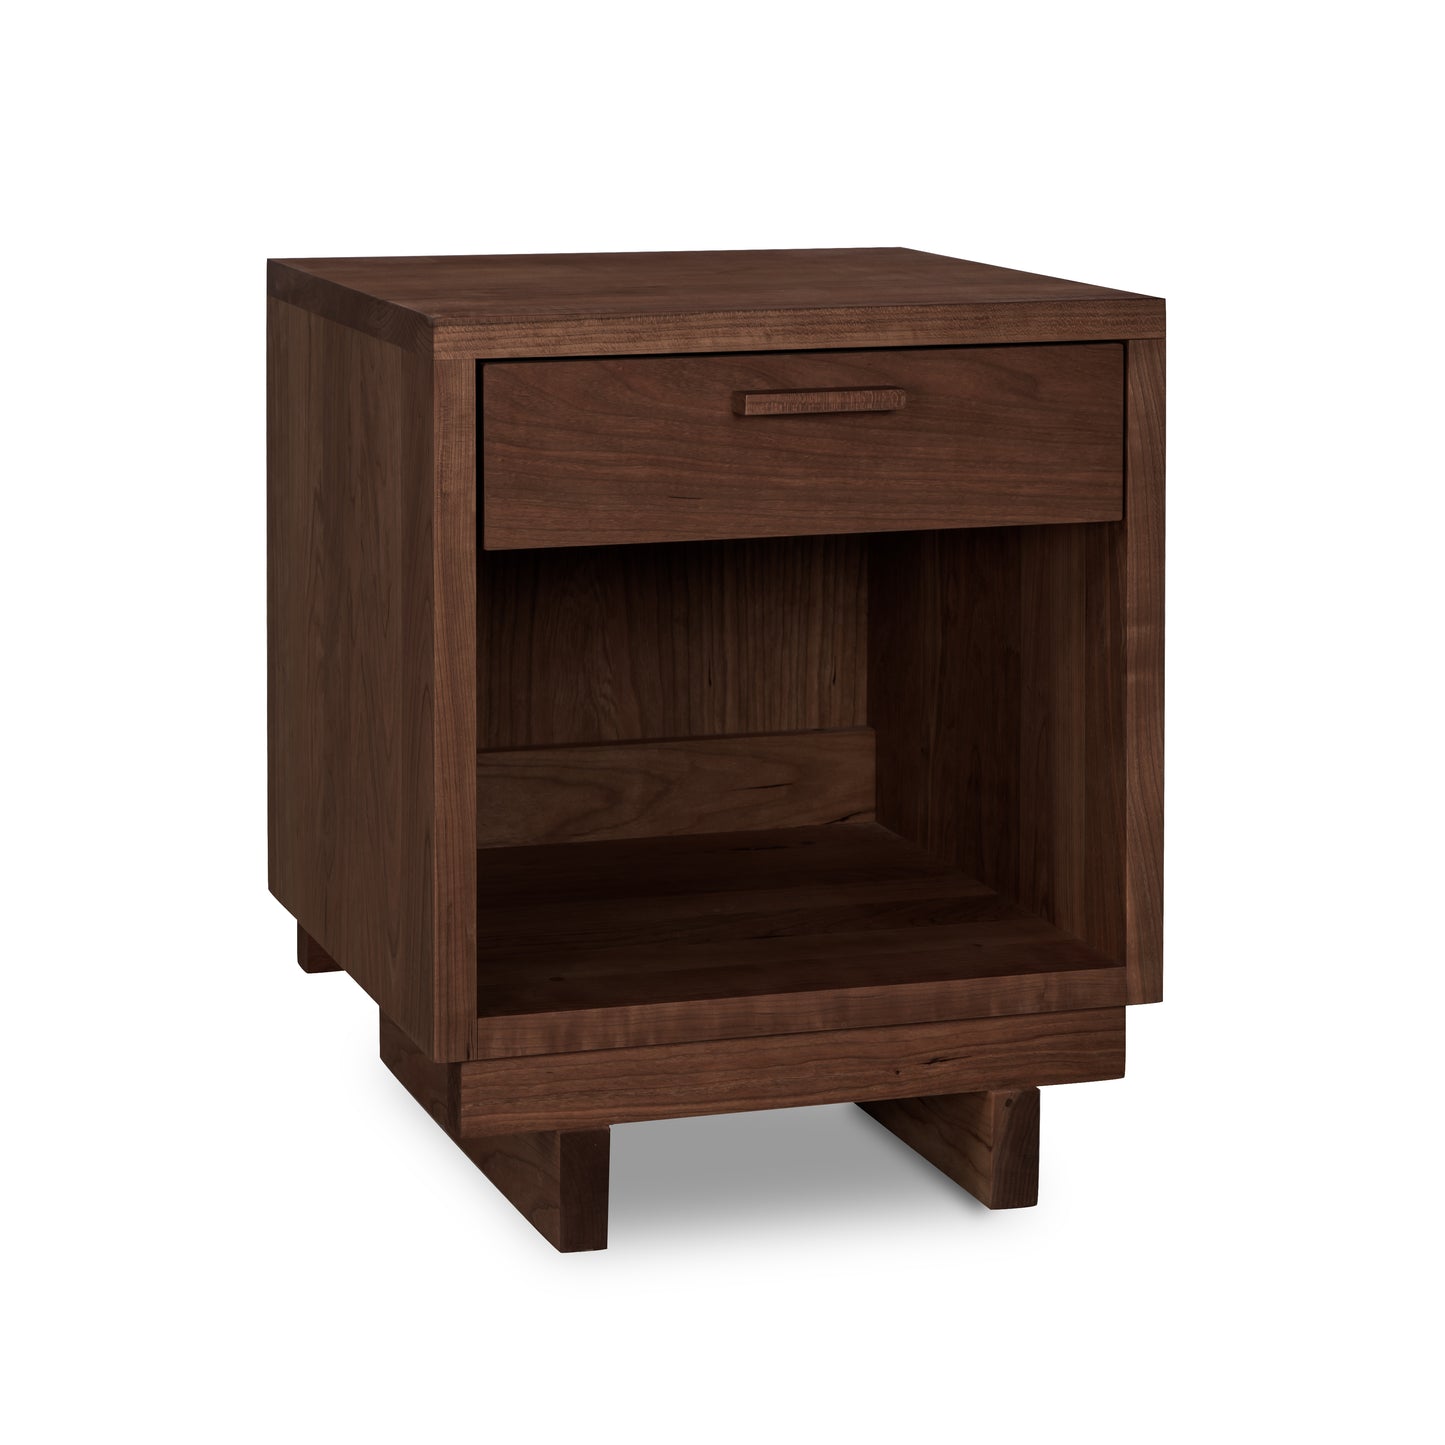 A Vermont Furniture Designs Loft 1-Drawer Enclosed Shelf Nightstand, isolated on a white background.